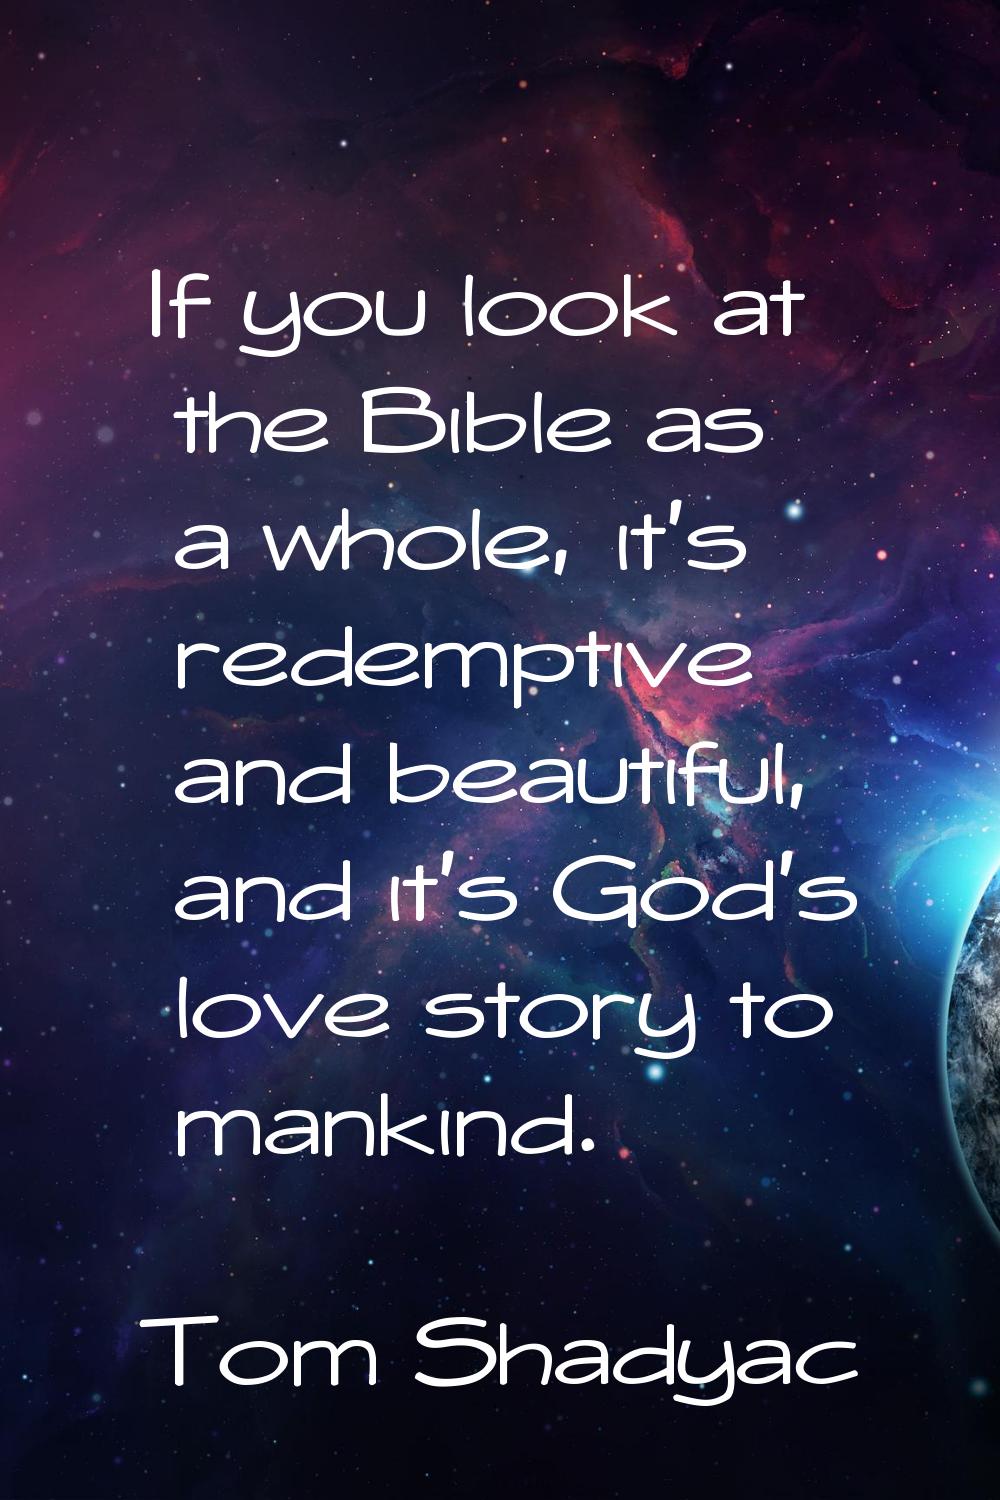 If you look at the Bible as a whole, it's redemptive and beautiful, and it's God's love story to ma